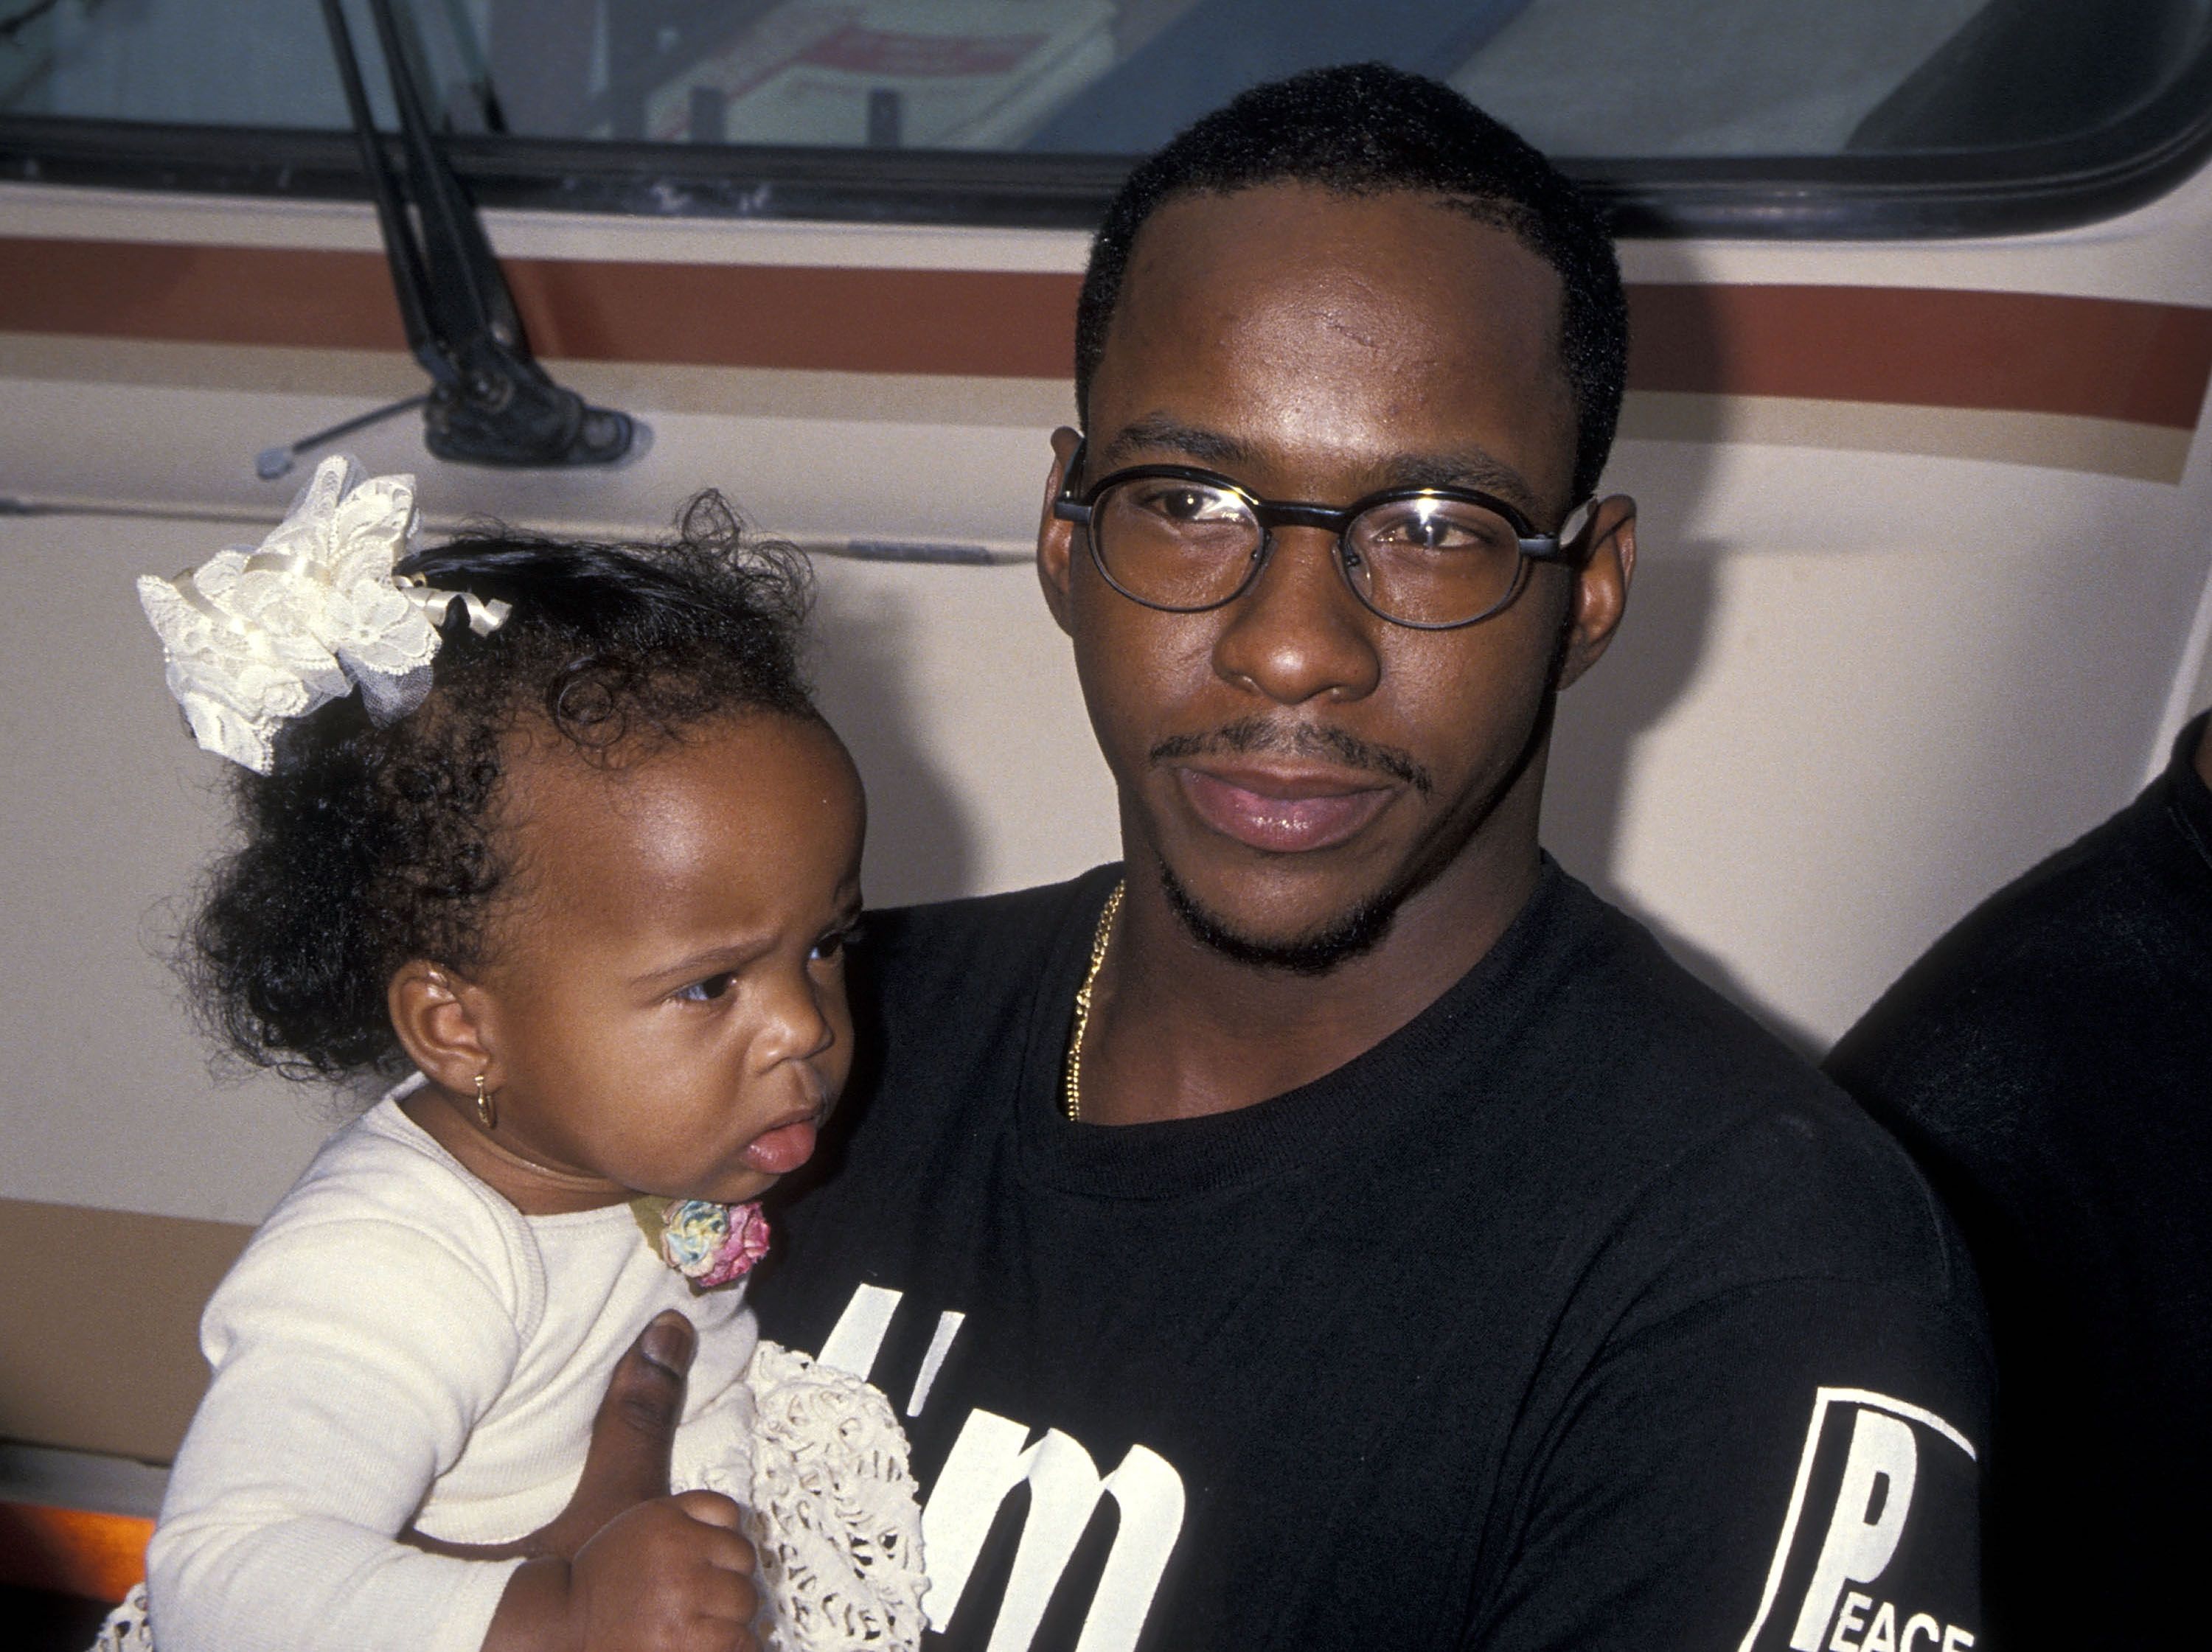 Singer Bobby Brown and daughter Bobbi Kristina Brown at the Eighth Annual Soul Train Music Awards on March 15, 1994 | Photo: Getty Images